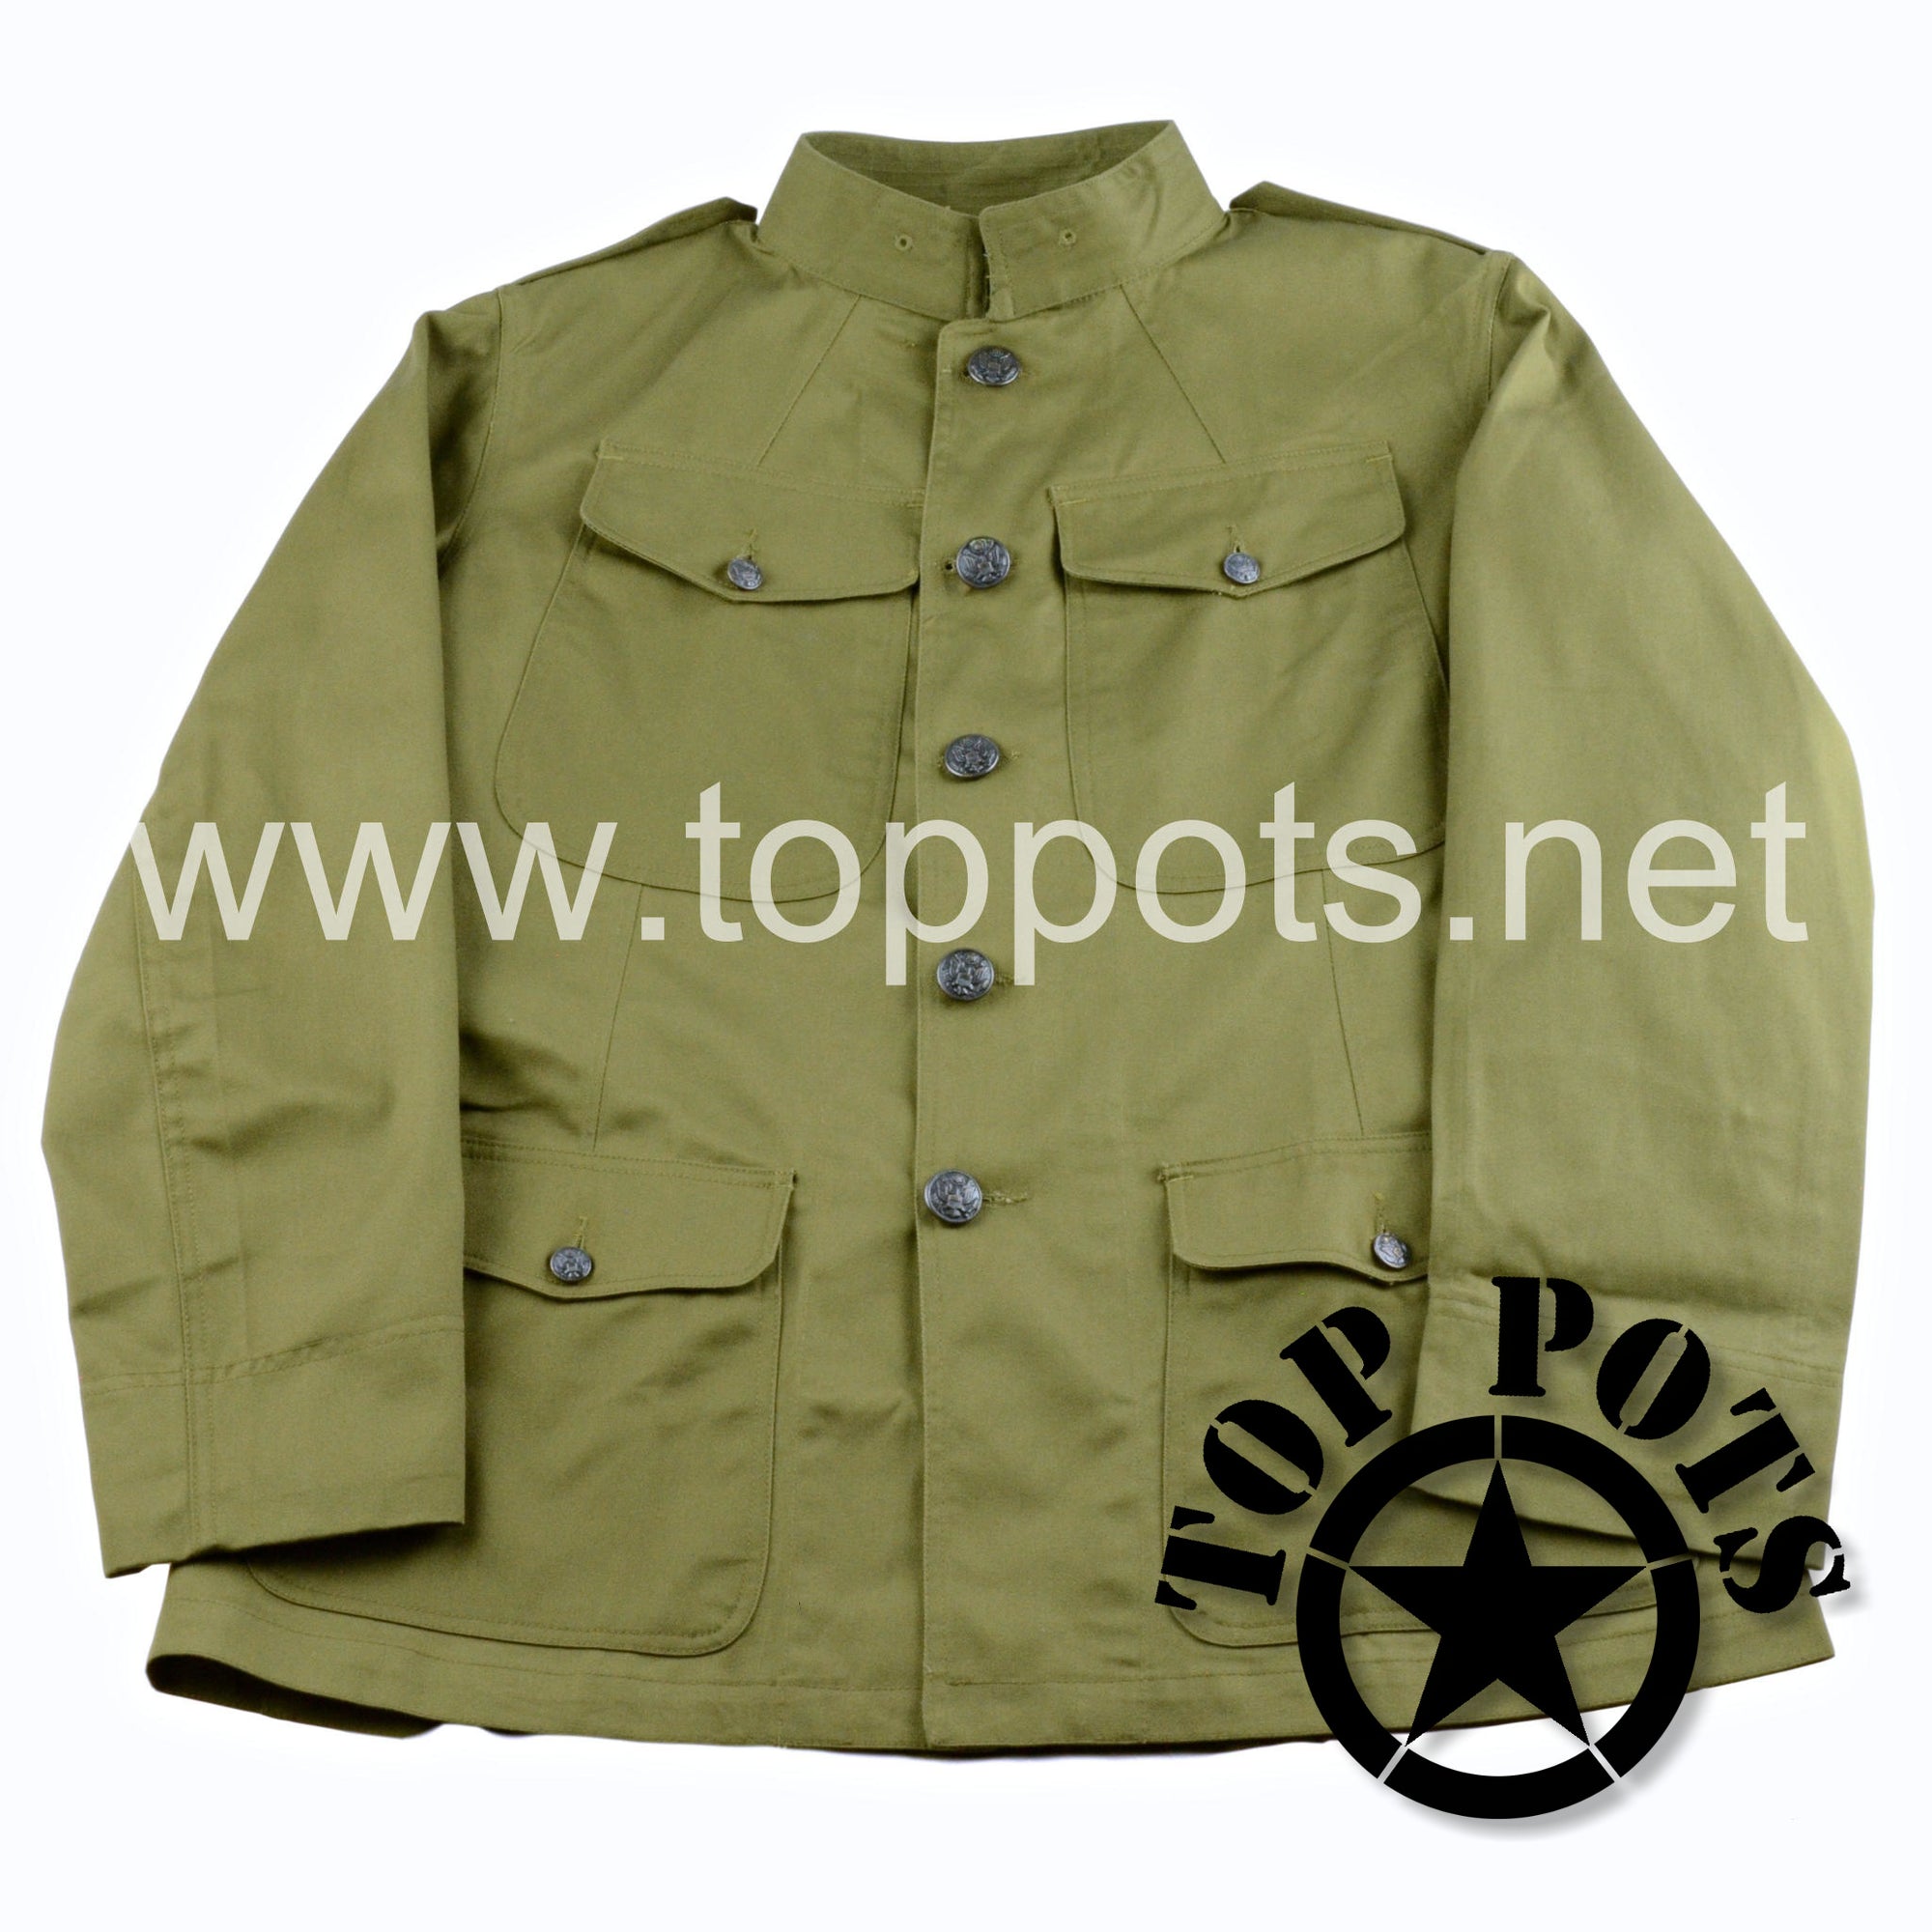 WWI US Army Reproduction American Doughboy M1912 Cotton Enlisted Summer Uniform Olive Drab Service Coat Jacket – Coat, Cotton, OD, M1912